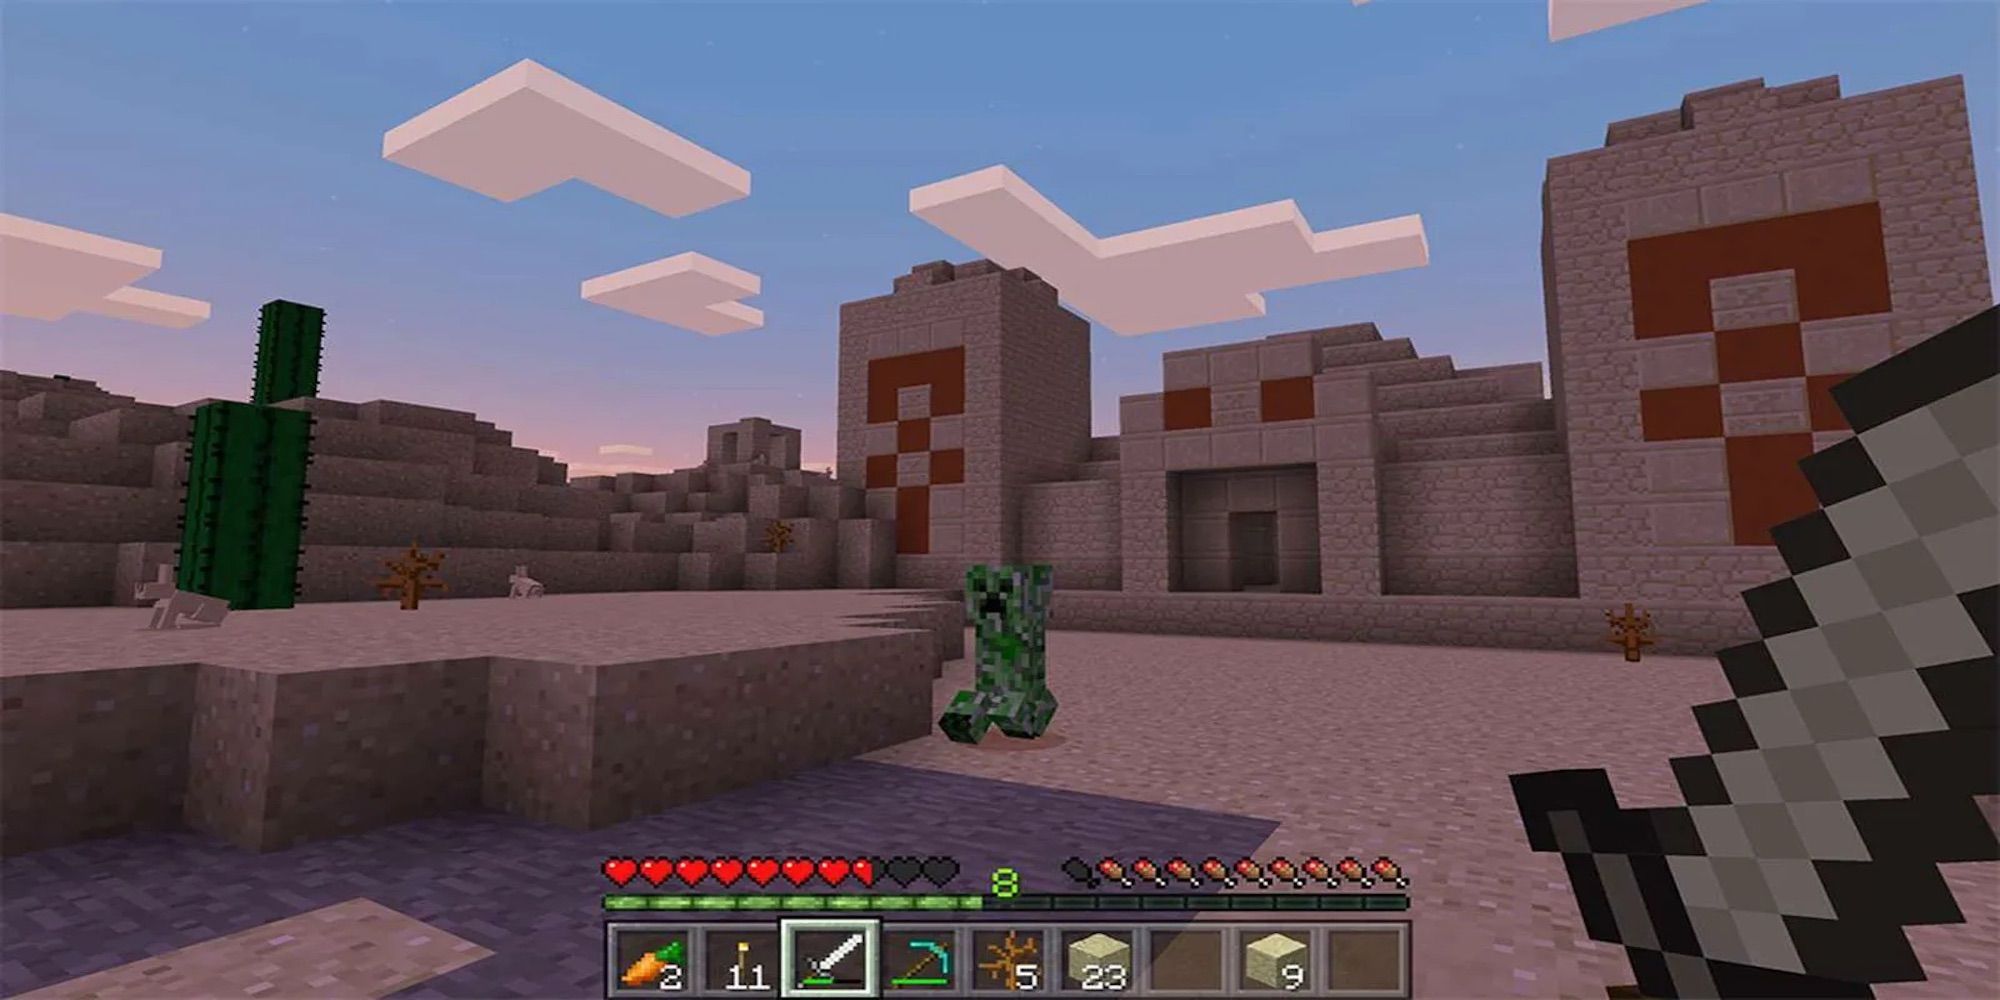 Creeper on the top of the mines in Minecraft